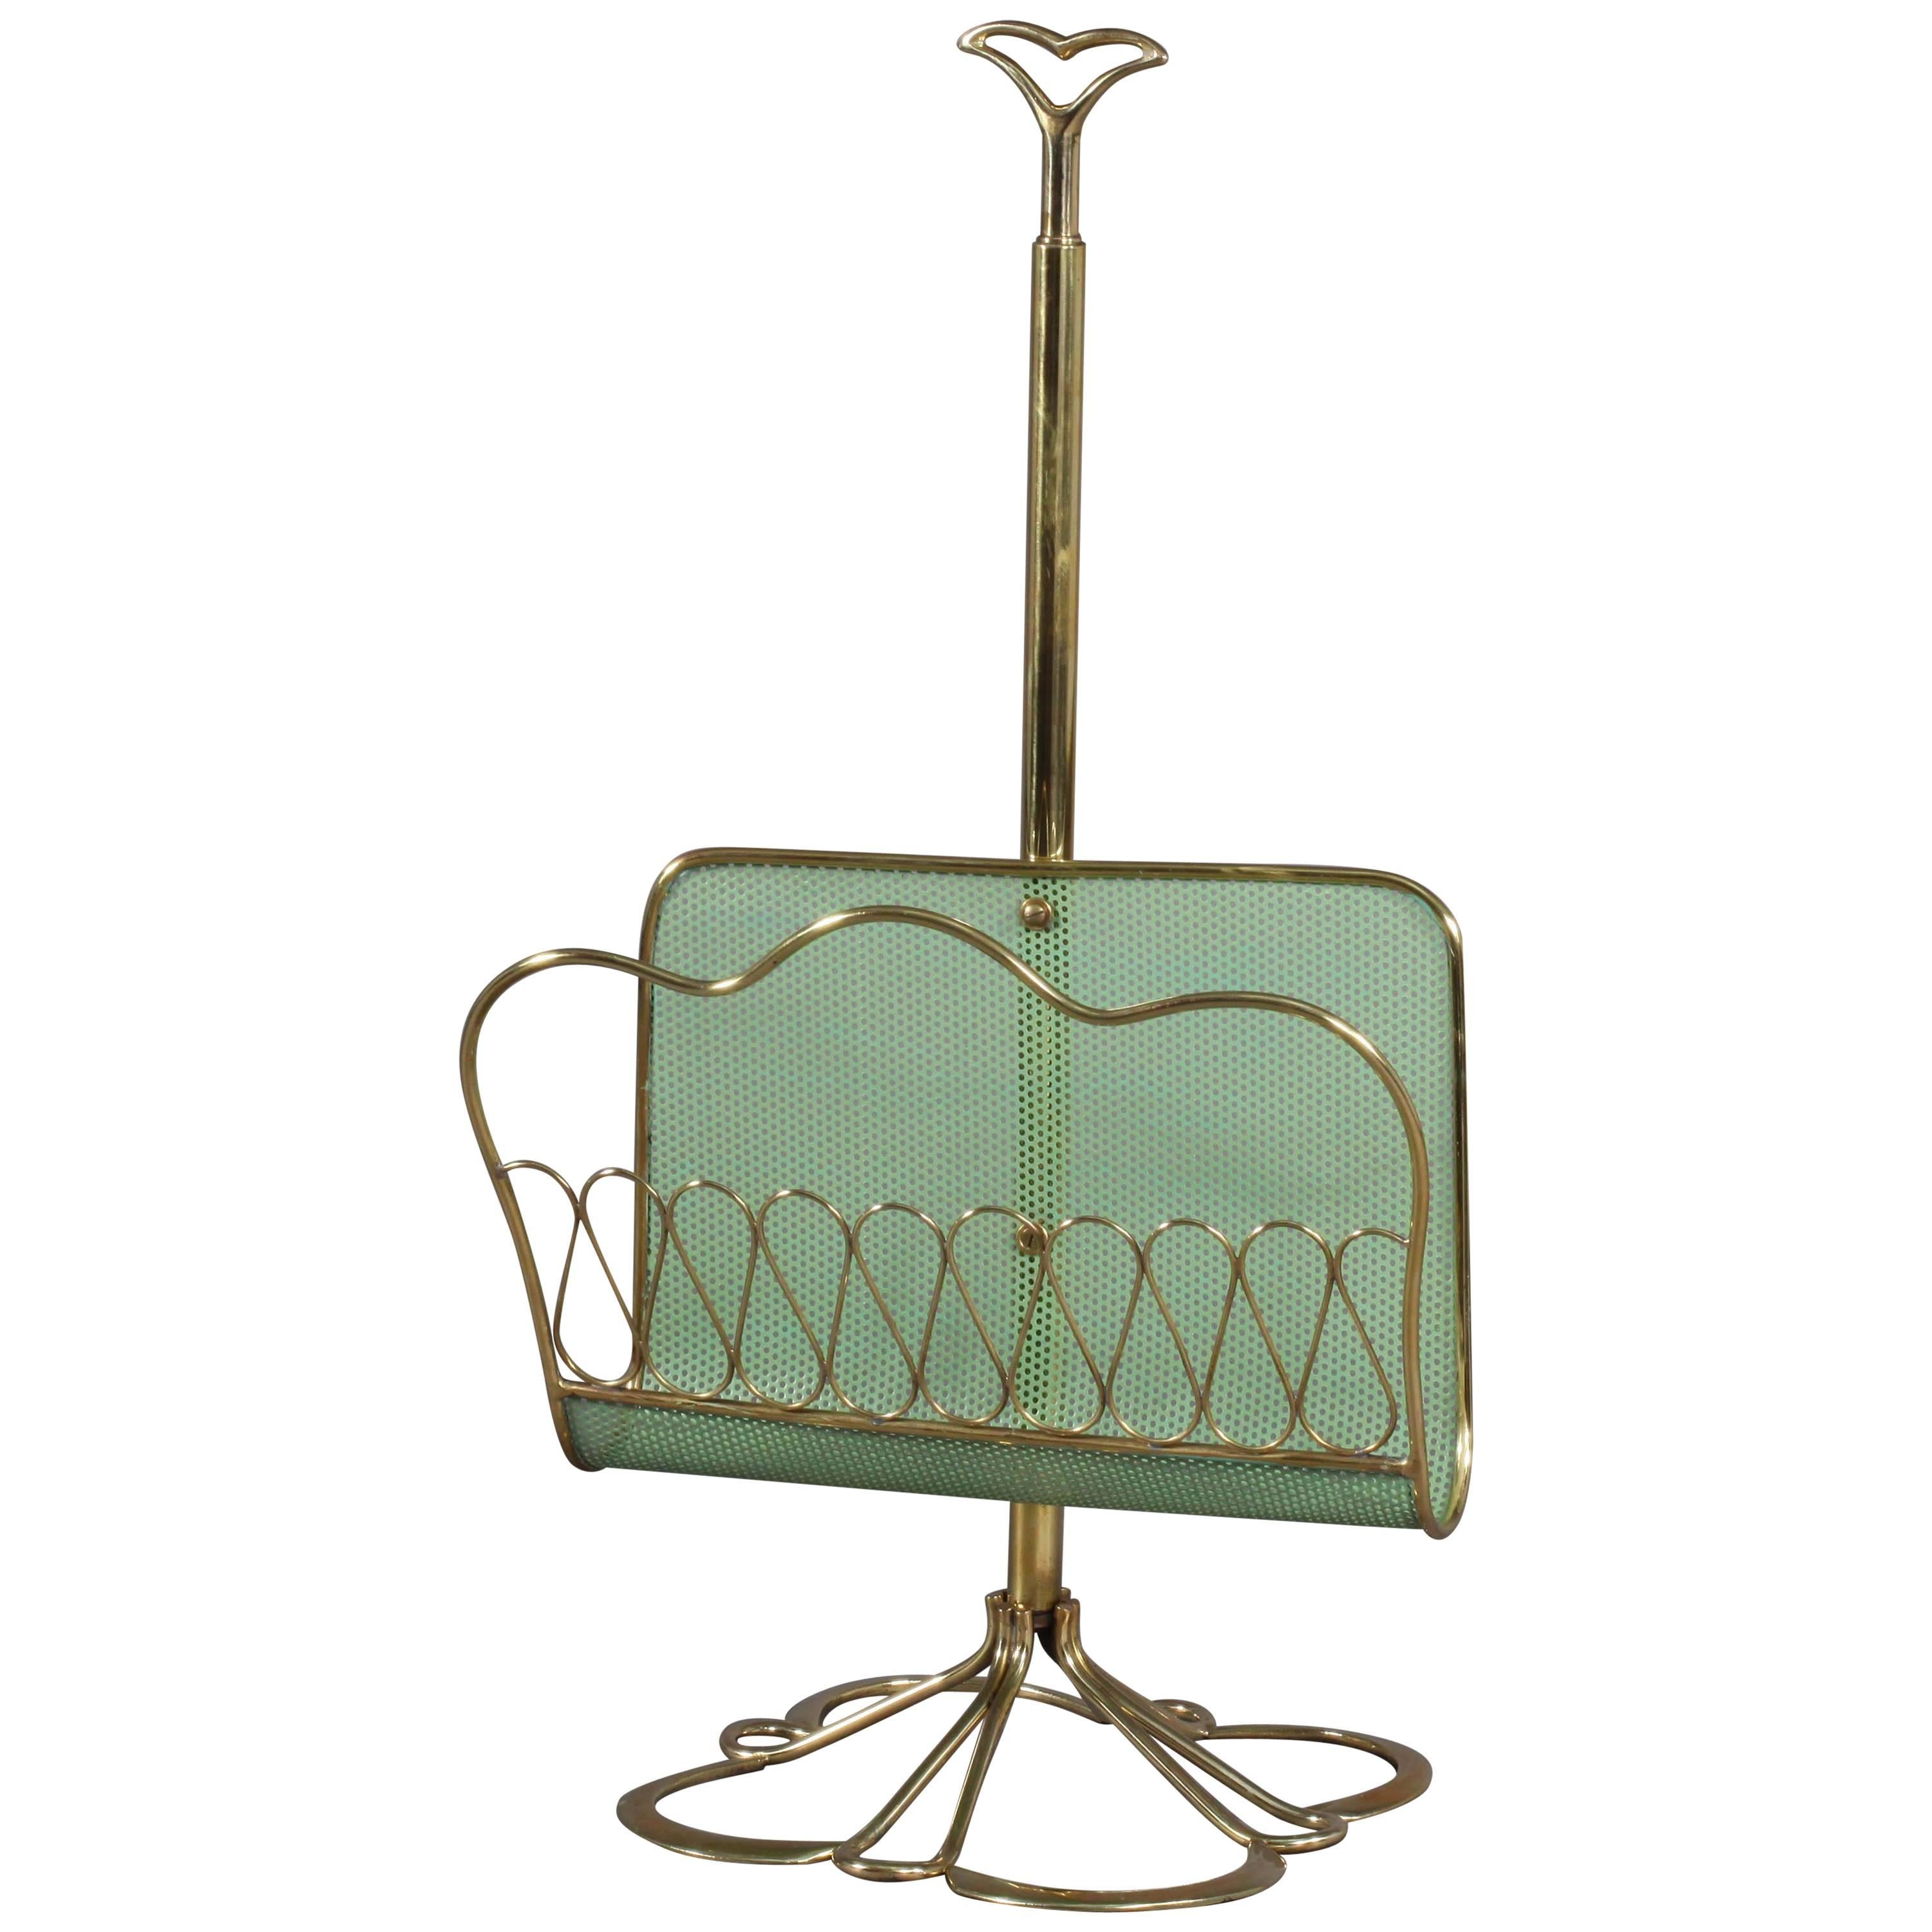 Newspaper Rack Italian 1950 Attributed to Gio Ponti For Sale